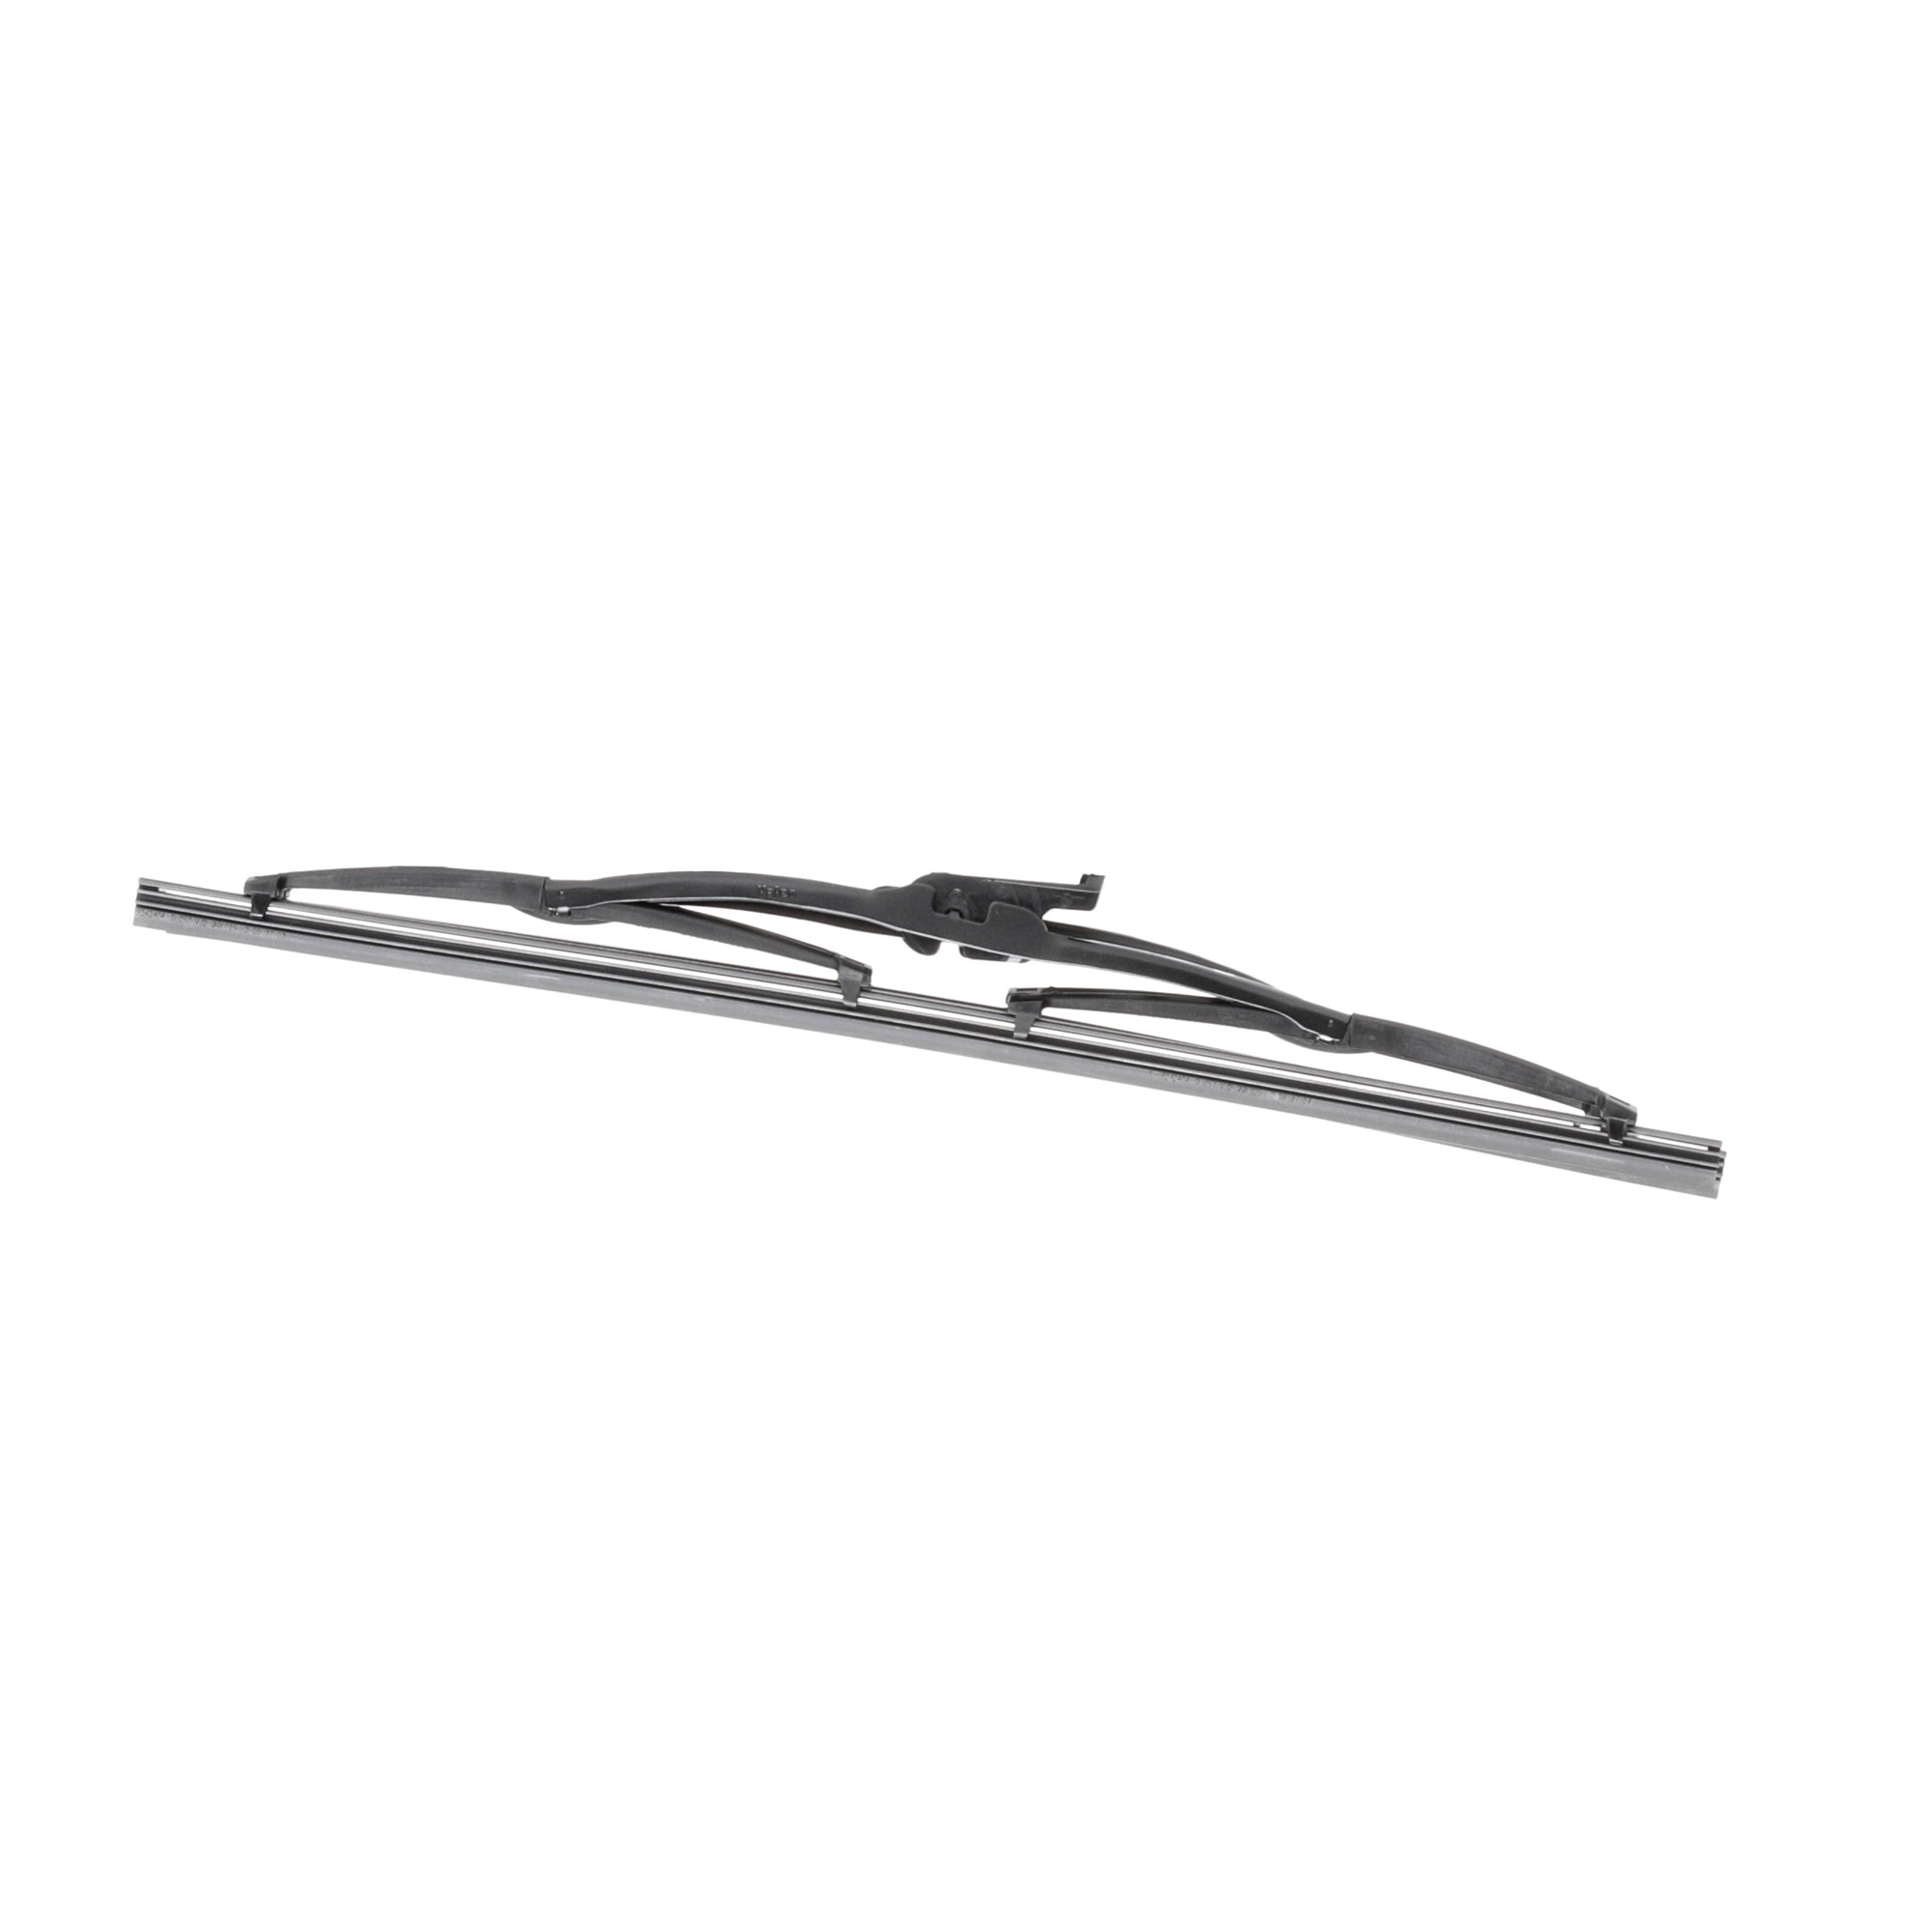 Wiper blade VALEO 576001 - Peugeot 204 Wiper and washer system spare parts order